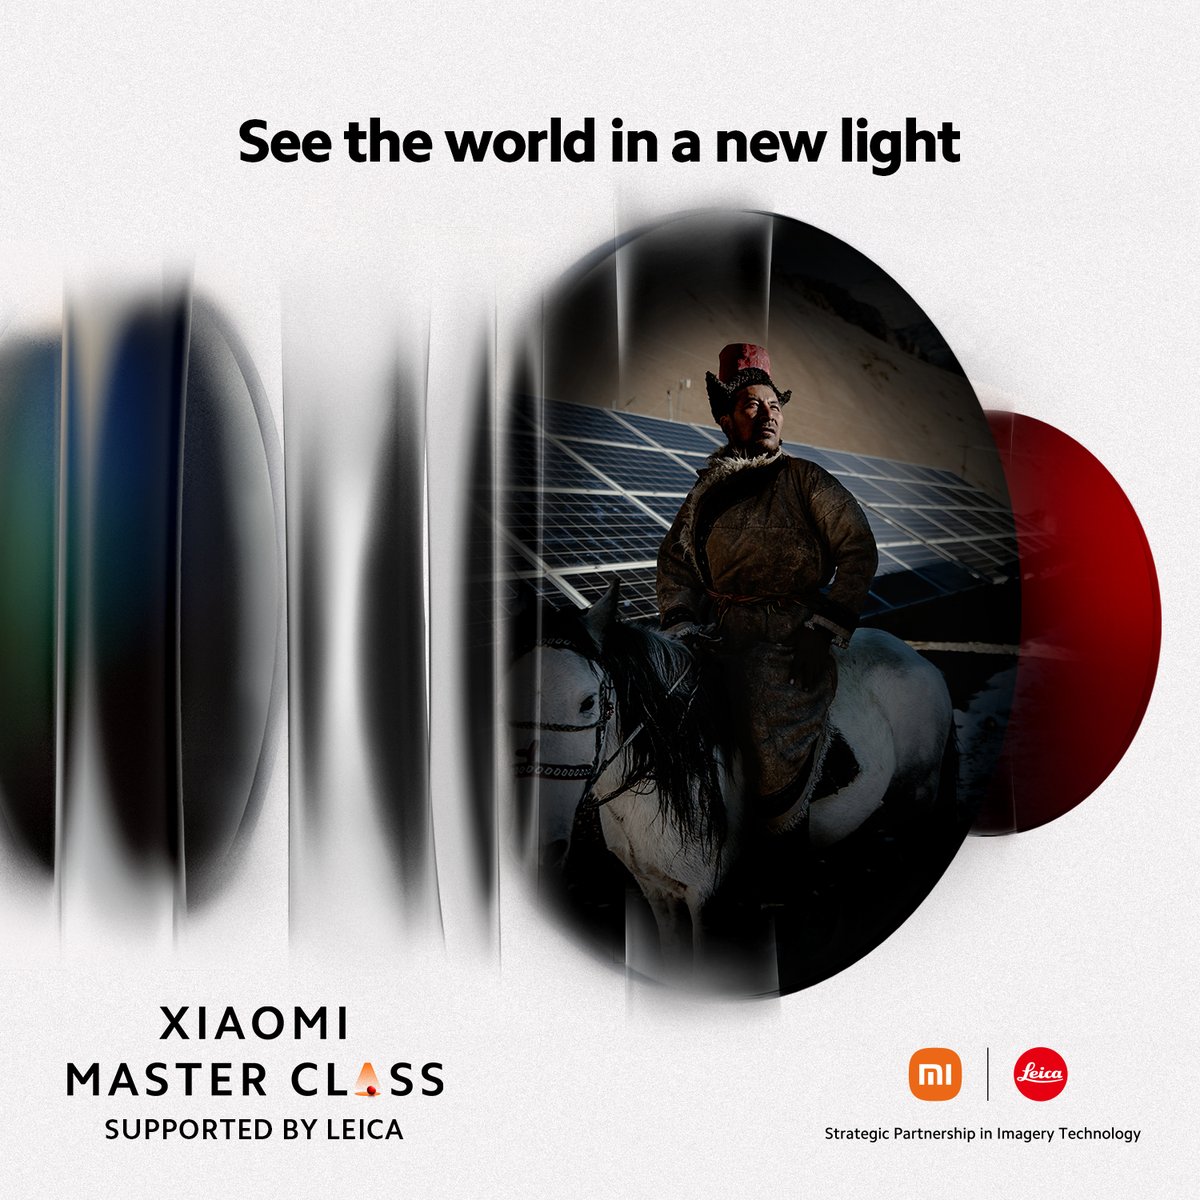 Introducing the #XiaomiMasterClass, supported by #Leica!

Get ready to See the World In a New Light as we dive into the art of capturing moments with your #Xiaomi14Series.

Stay tuned for expert tips, breathtaking shots, and endless inspiration!
#SeeItInNewLight